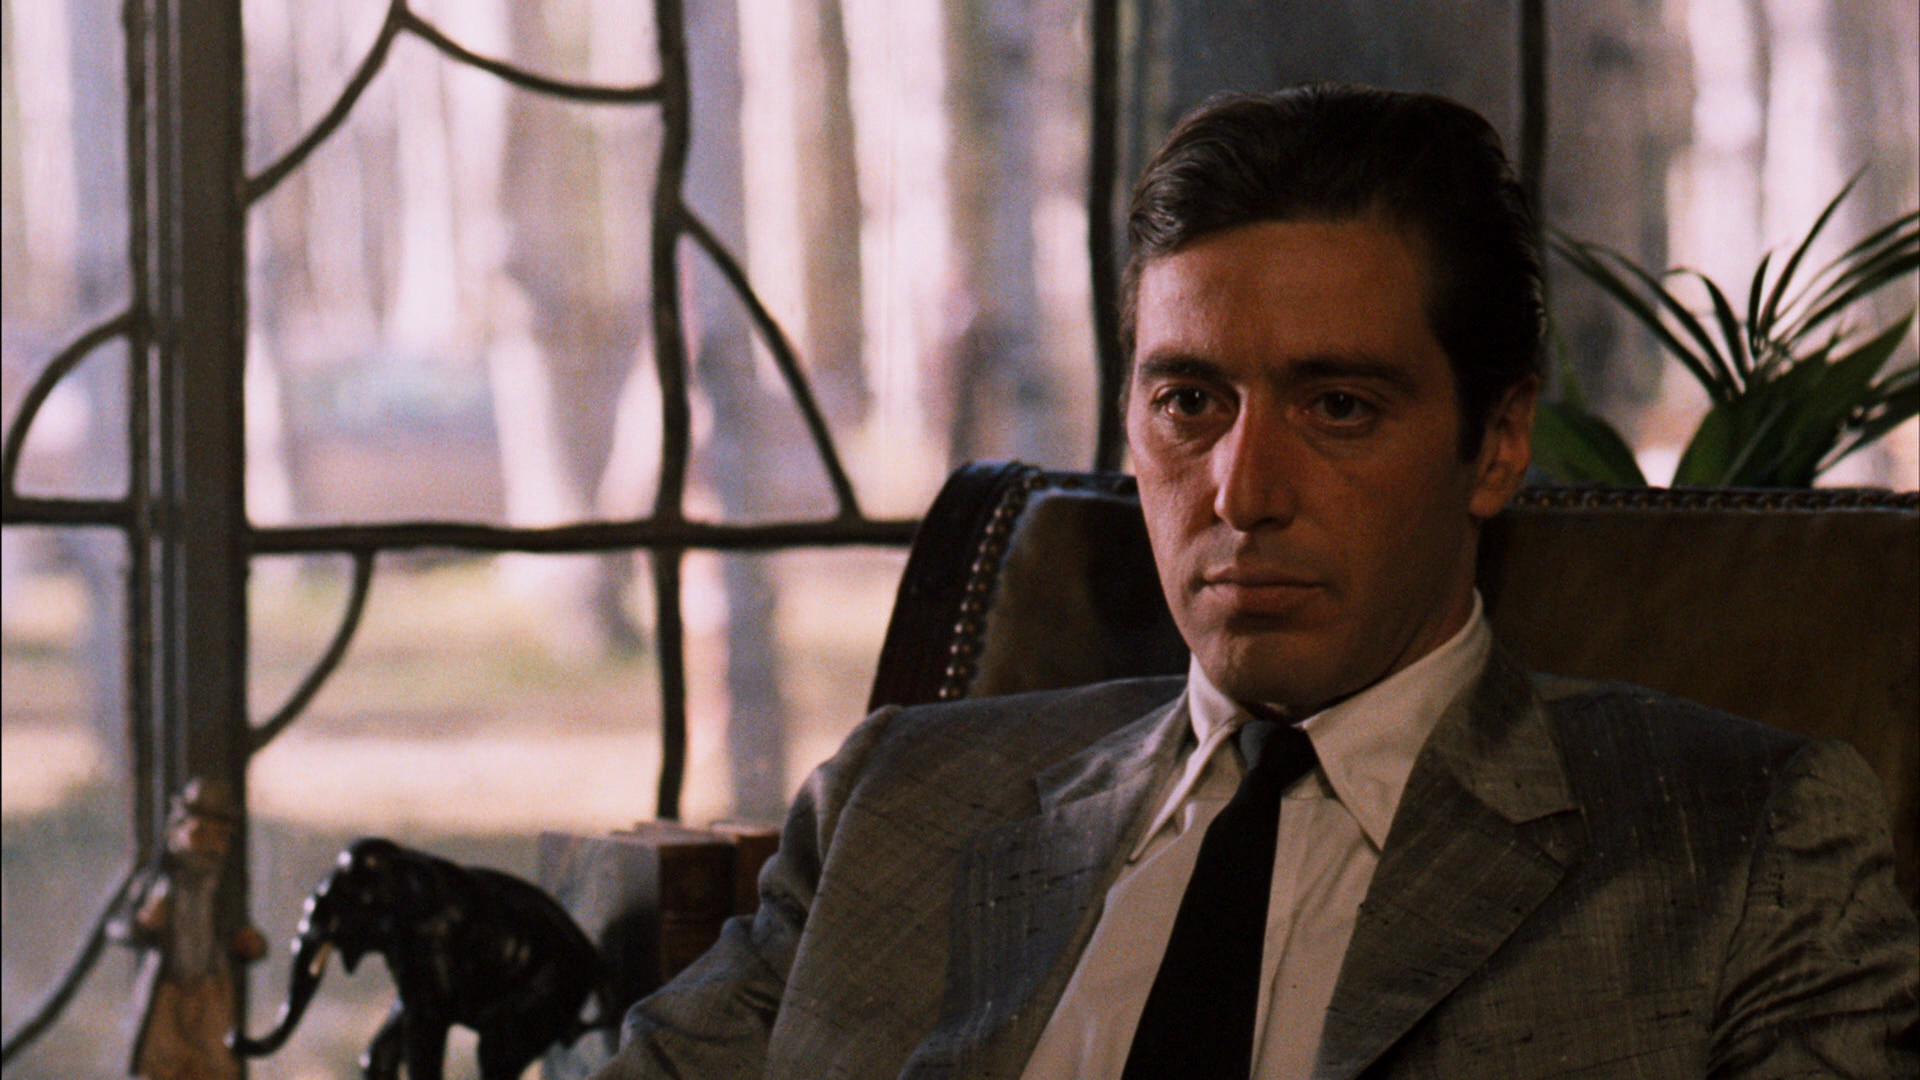 Great Character: Michael Corleone (“The Godfather”)